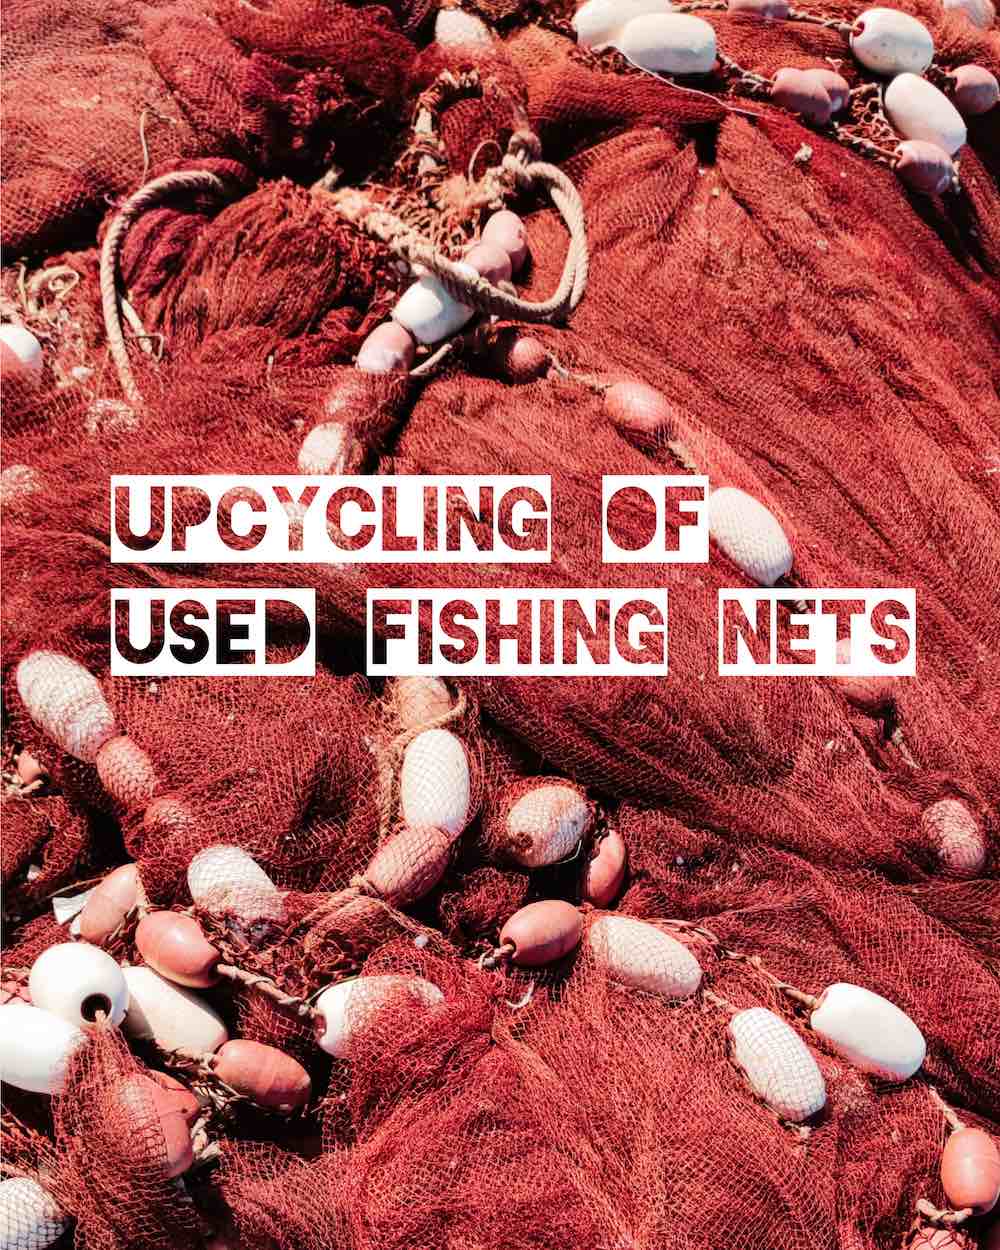 Red Moroccan fishing nets. A white text says: Upcycling of used fishing nets.